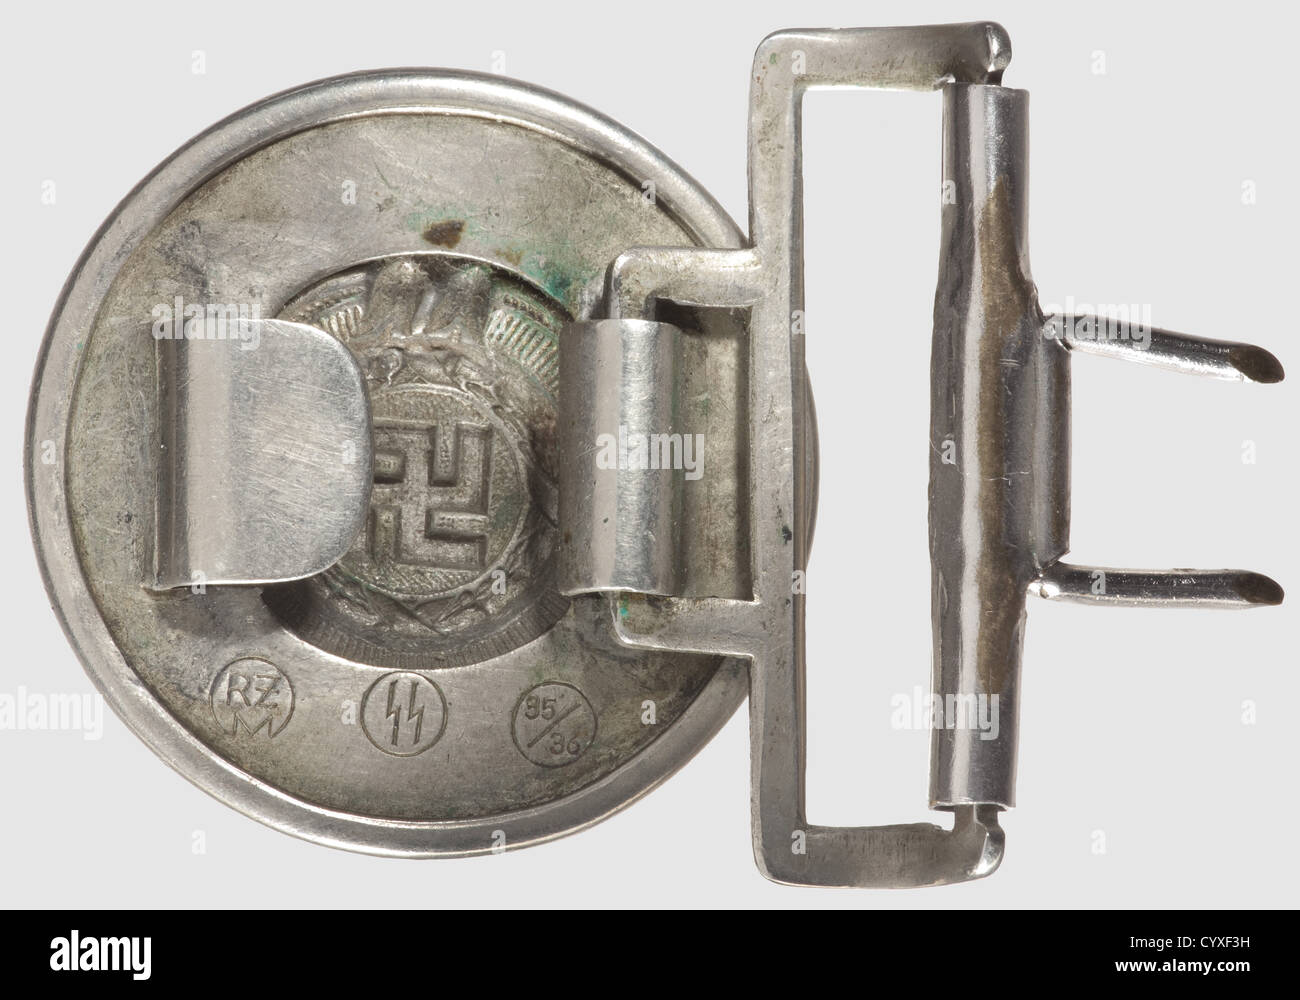 A waist belt buckle,for leaders of the Allgemeine-SS and SS-Verfügungstruppe Early nickel silver buckle with reverse stampings 'RZM','SS' and '35/36'. Indisputably original,made by Overhoff in 1935. Belt buckles made of nickel silver are substantially harder to locate than the later buckles made of zinc,historic,historical,1930s,20th century,Waffen-SS,armed division of the SS,armed service,armed services,NS,National Socialism,Nazism,Third Reich,German Reich,Germany,military,militaria,utensil,piece of equipment,utensils,object,objects,st,Additional-Rights-Clearences-Not Available Stock Photo